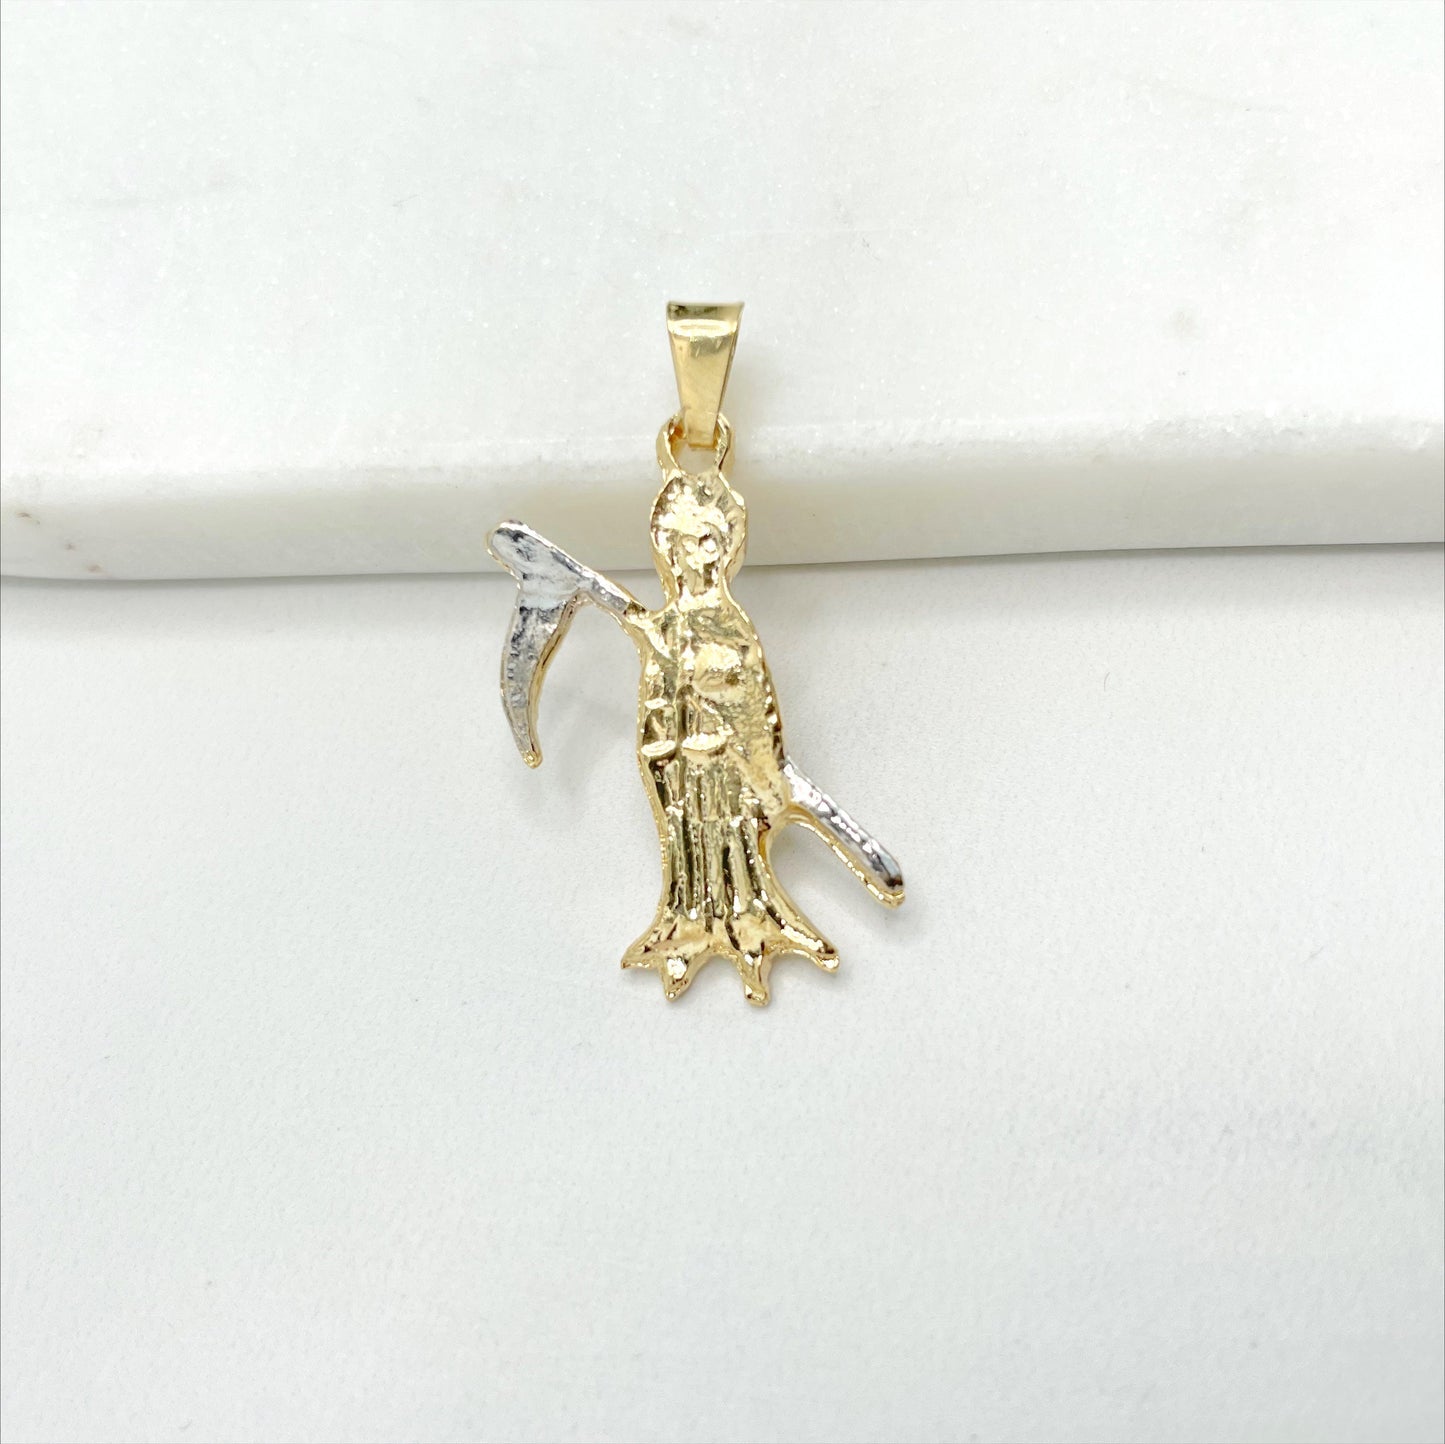 18k Gold Filled Two Tone Santa Muerte, Grim Reaper Pendant Charms, Skeleton Jewelry, Wholesale Jewelry Making Supplies